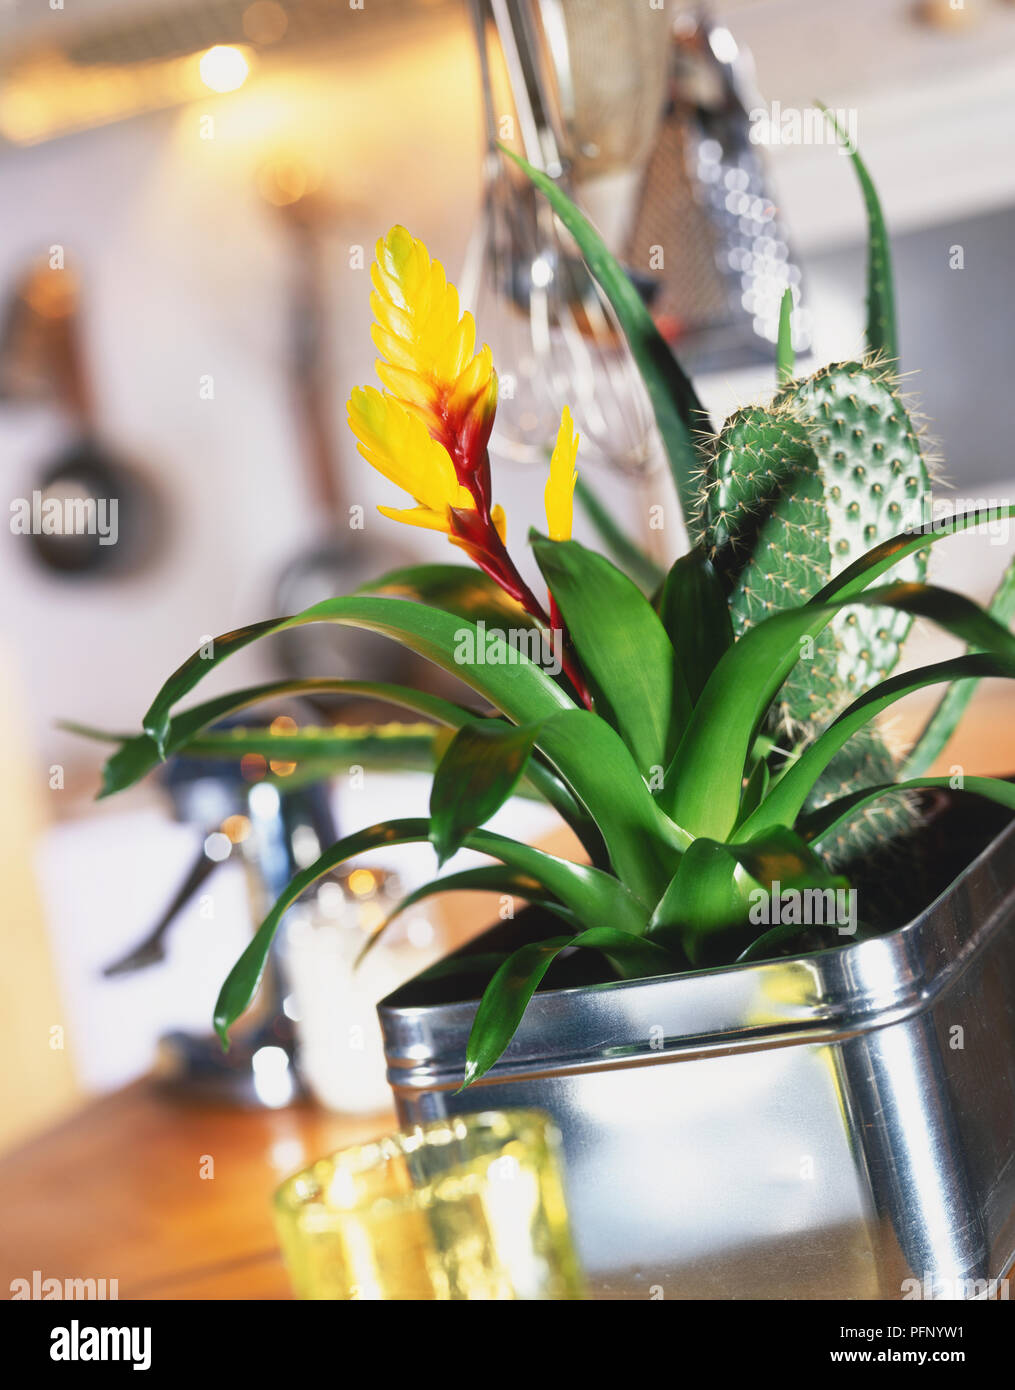 Yellow-red flowered Bromeliad in a silver tin in a kitchen, tilted view. Stock Photo